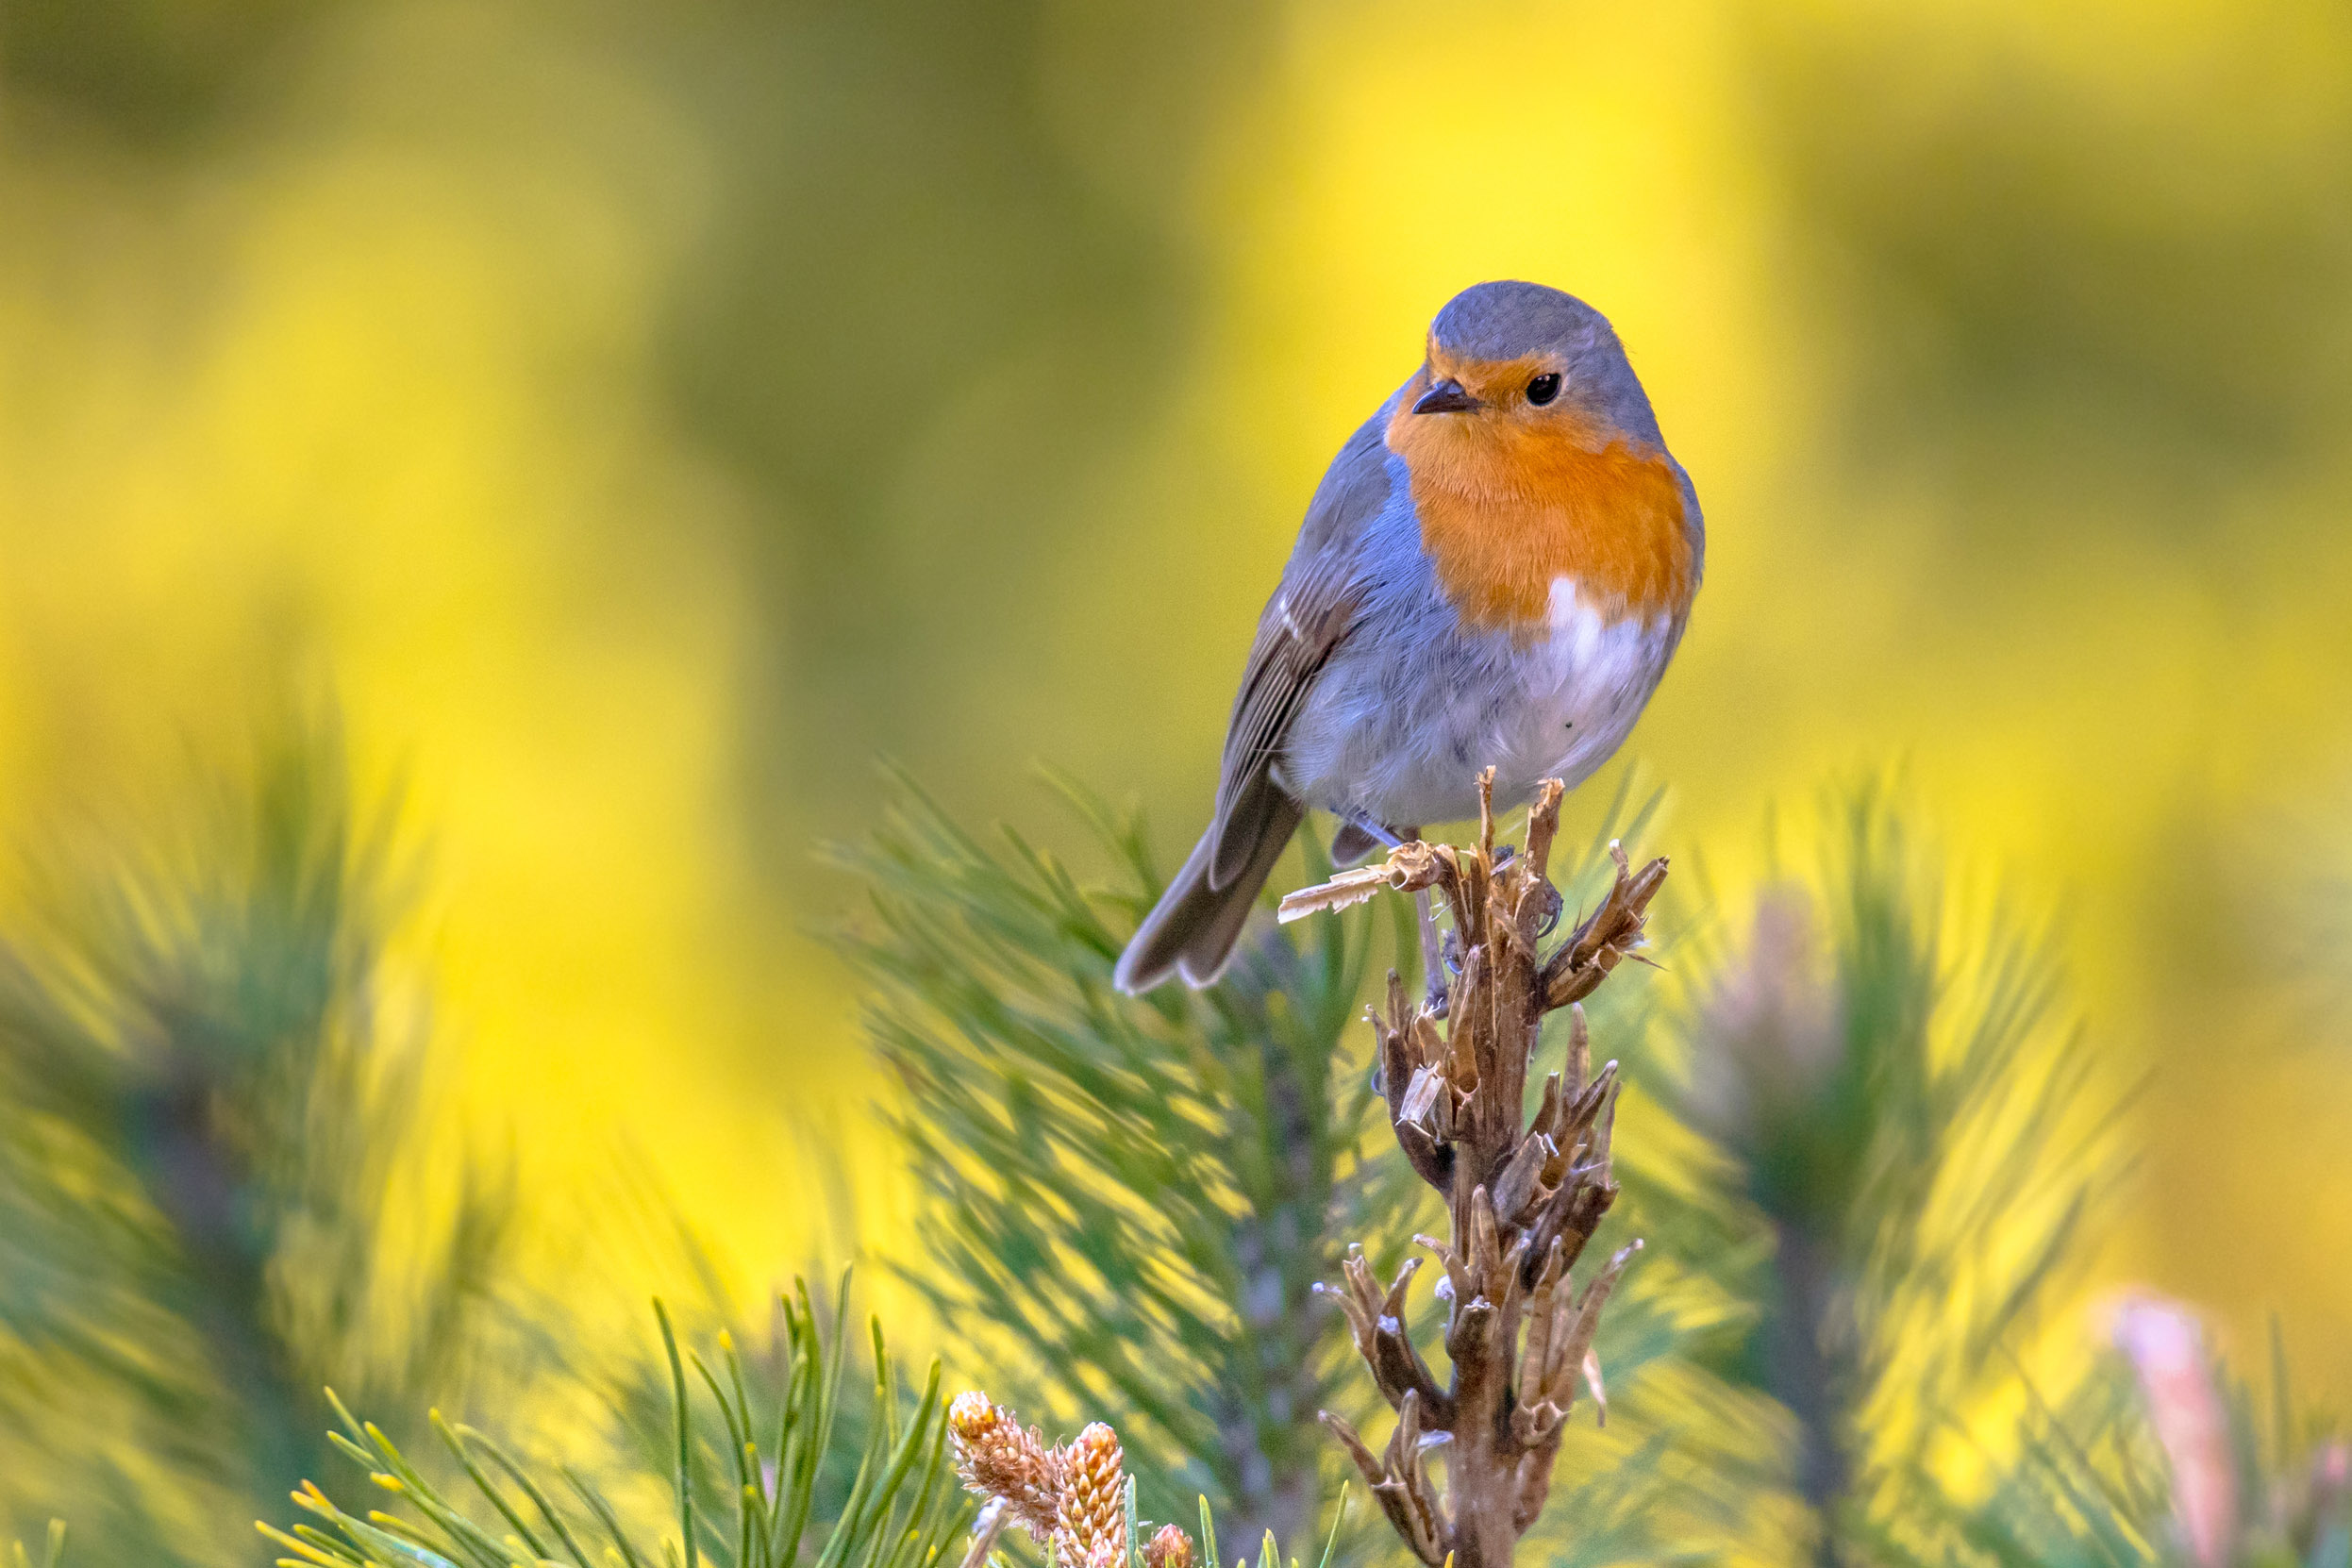 A Robin perched at the top of a pine tree.